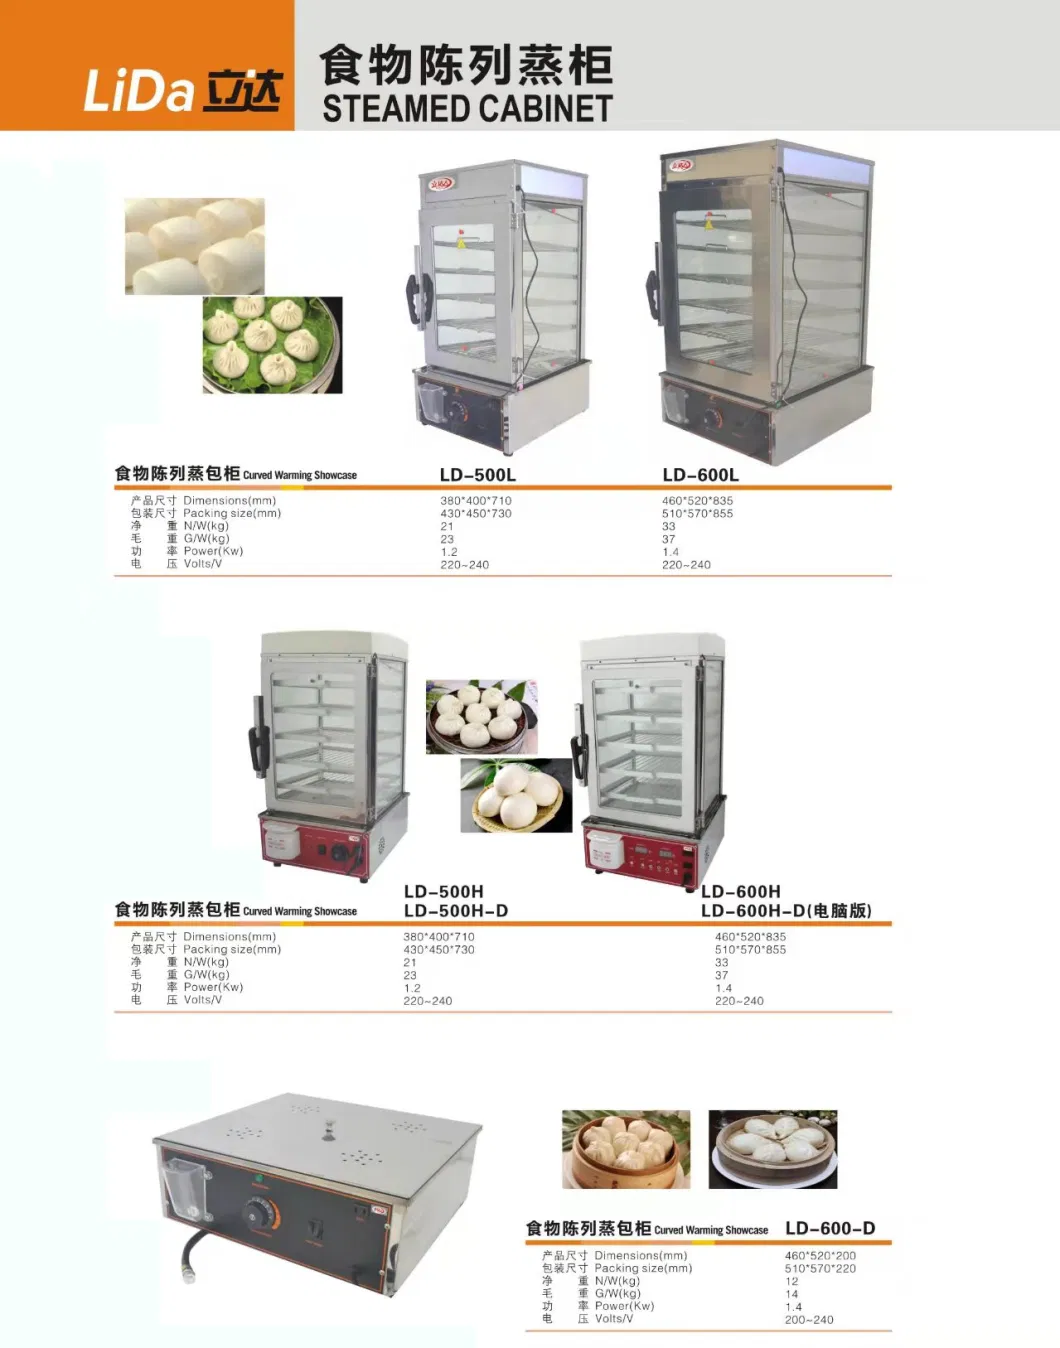 CE Approved Commercial Stainless Steel Convenient Store Restaurant Electric Bun Steamer 5 Layer Food Steam Steaming Machine Cabinet Showcase Display